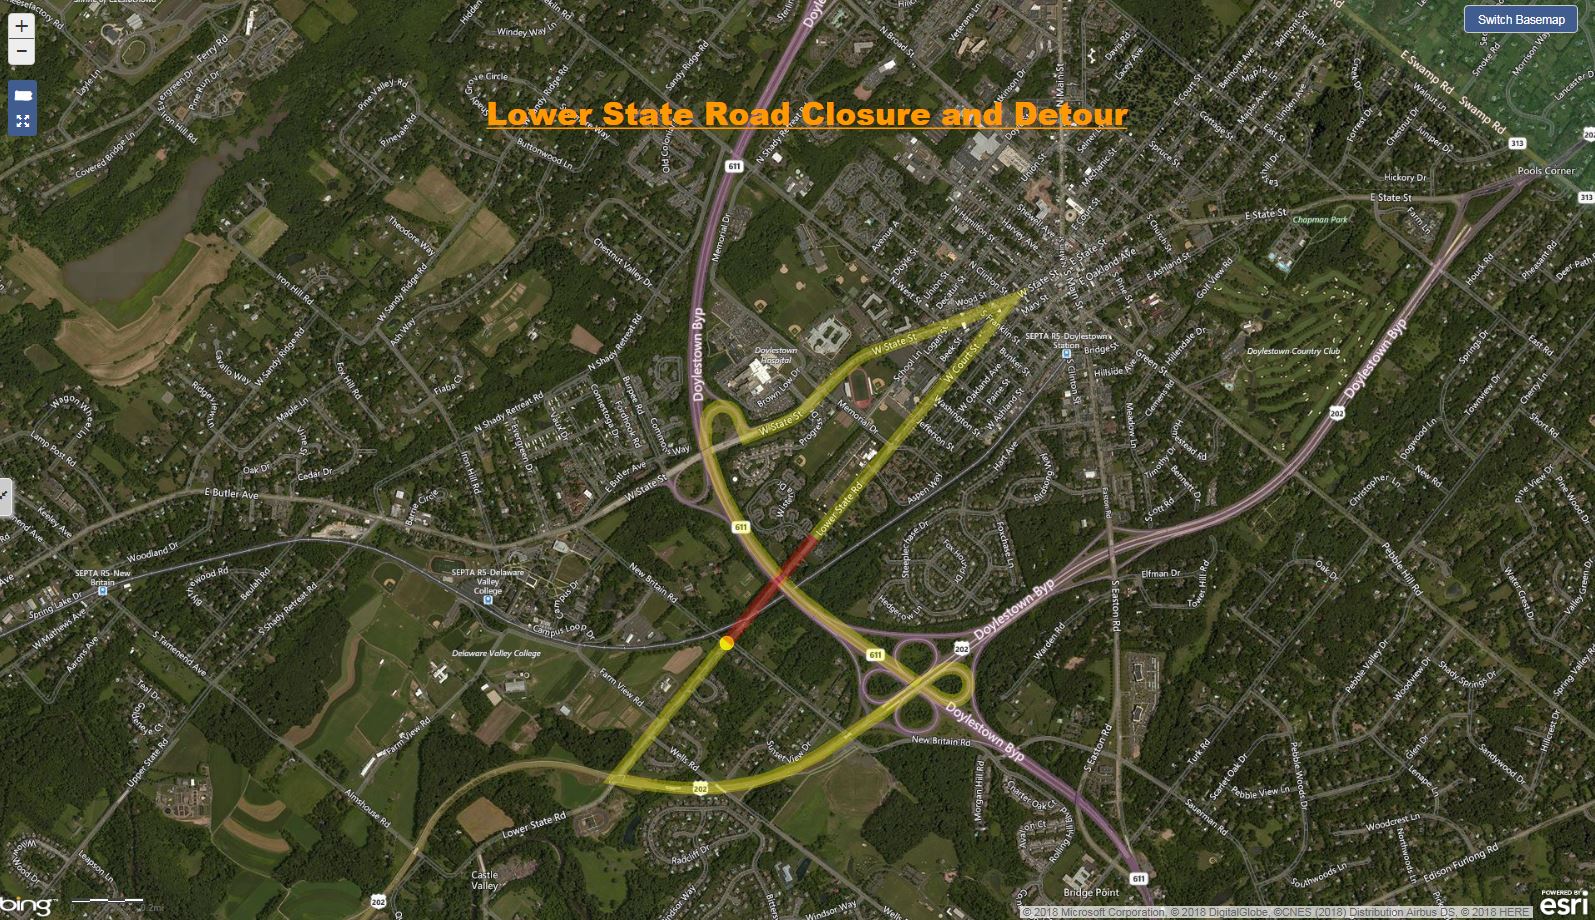 Lower State Road Closure and Detour Bucks County.JPG